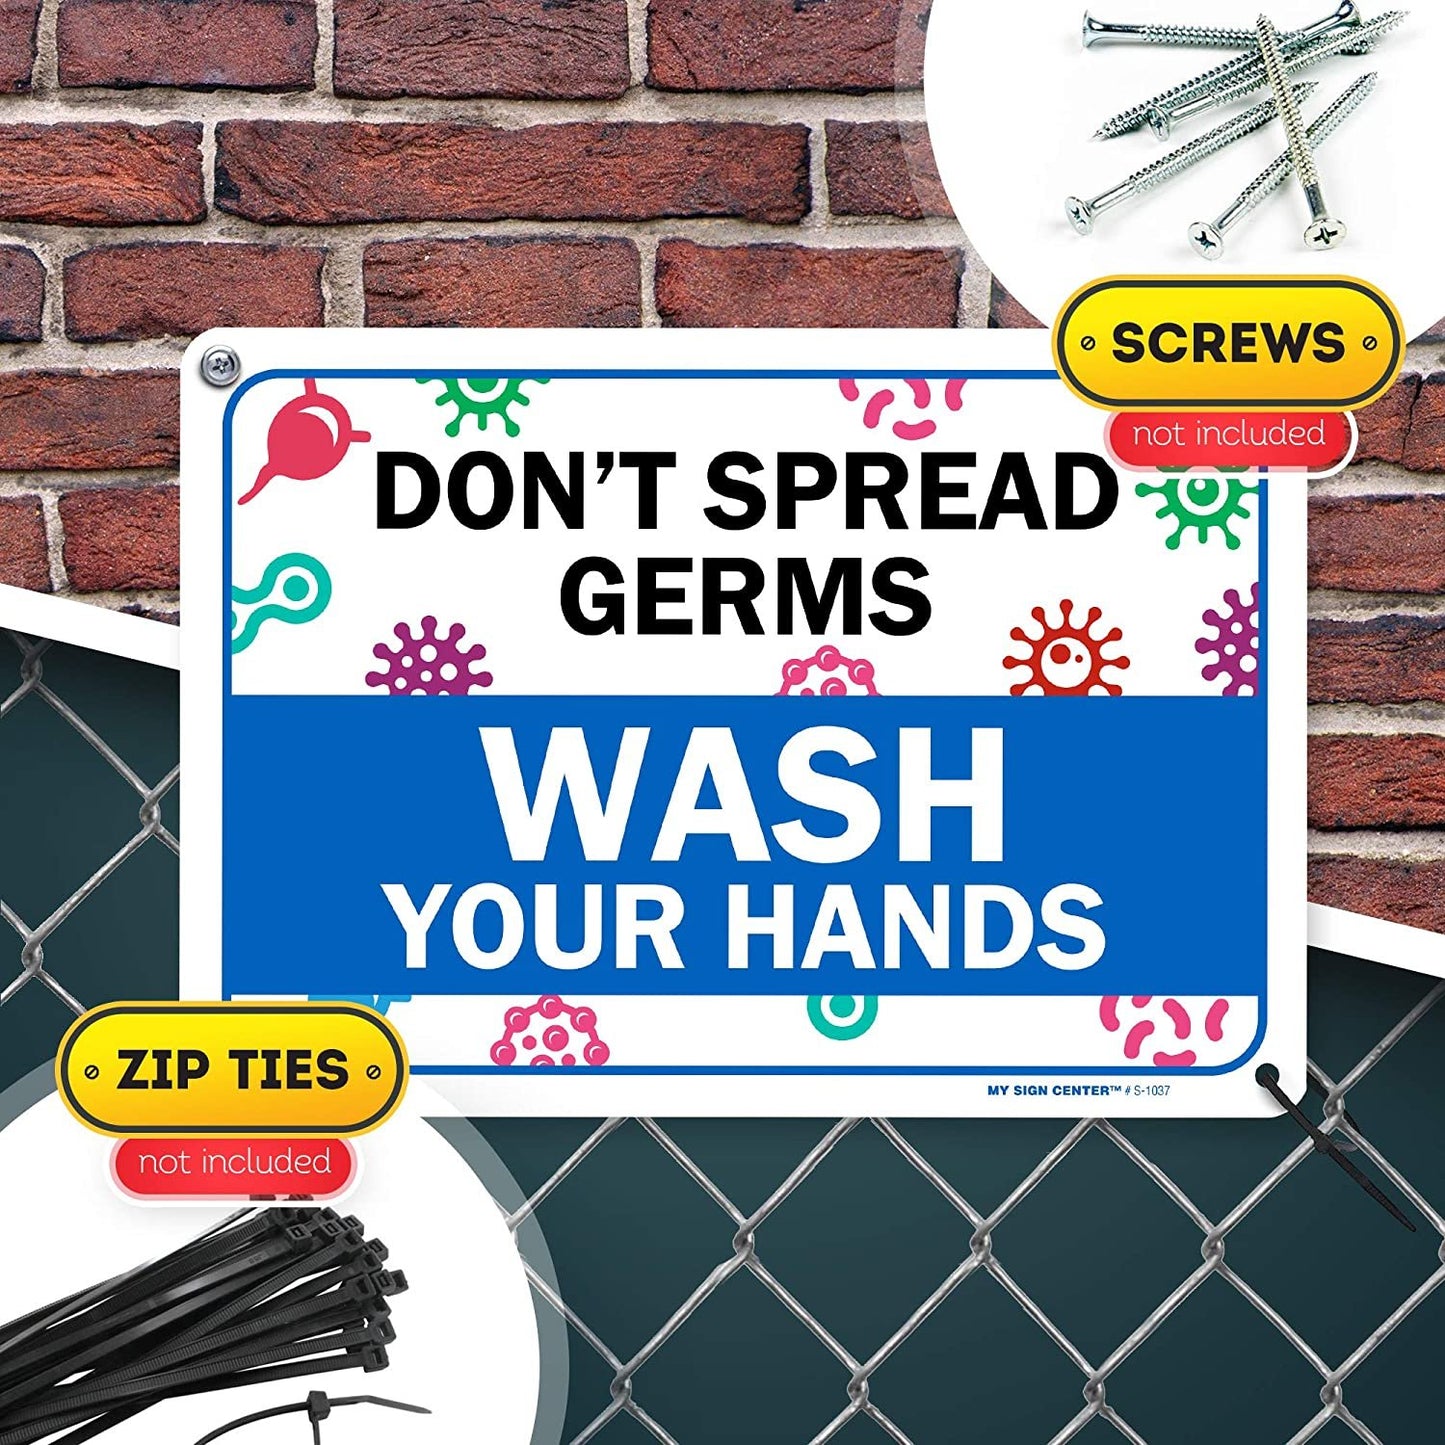 Don't Spread Germs Wash Your Hands Sign